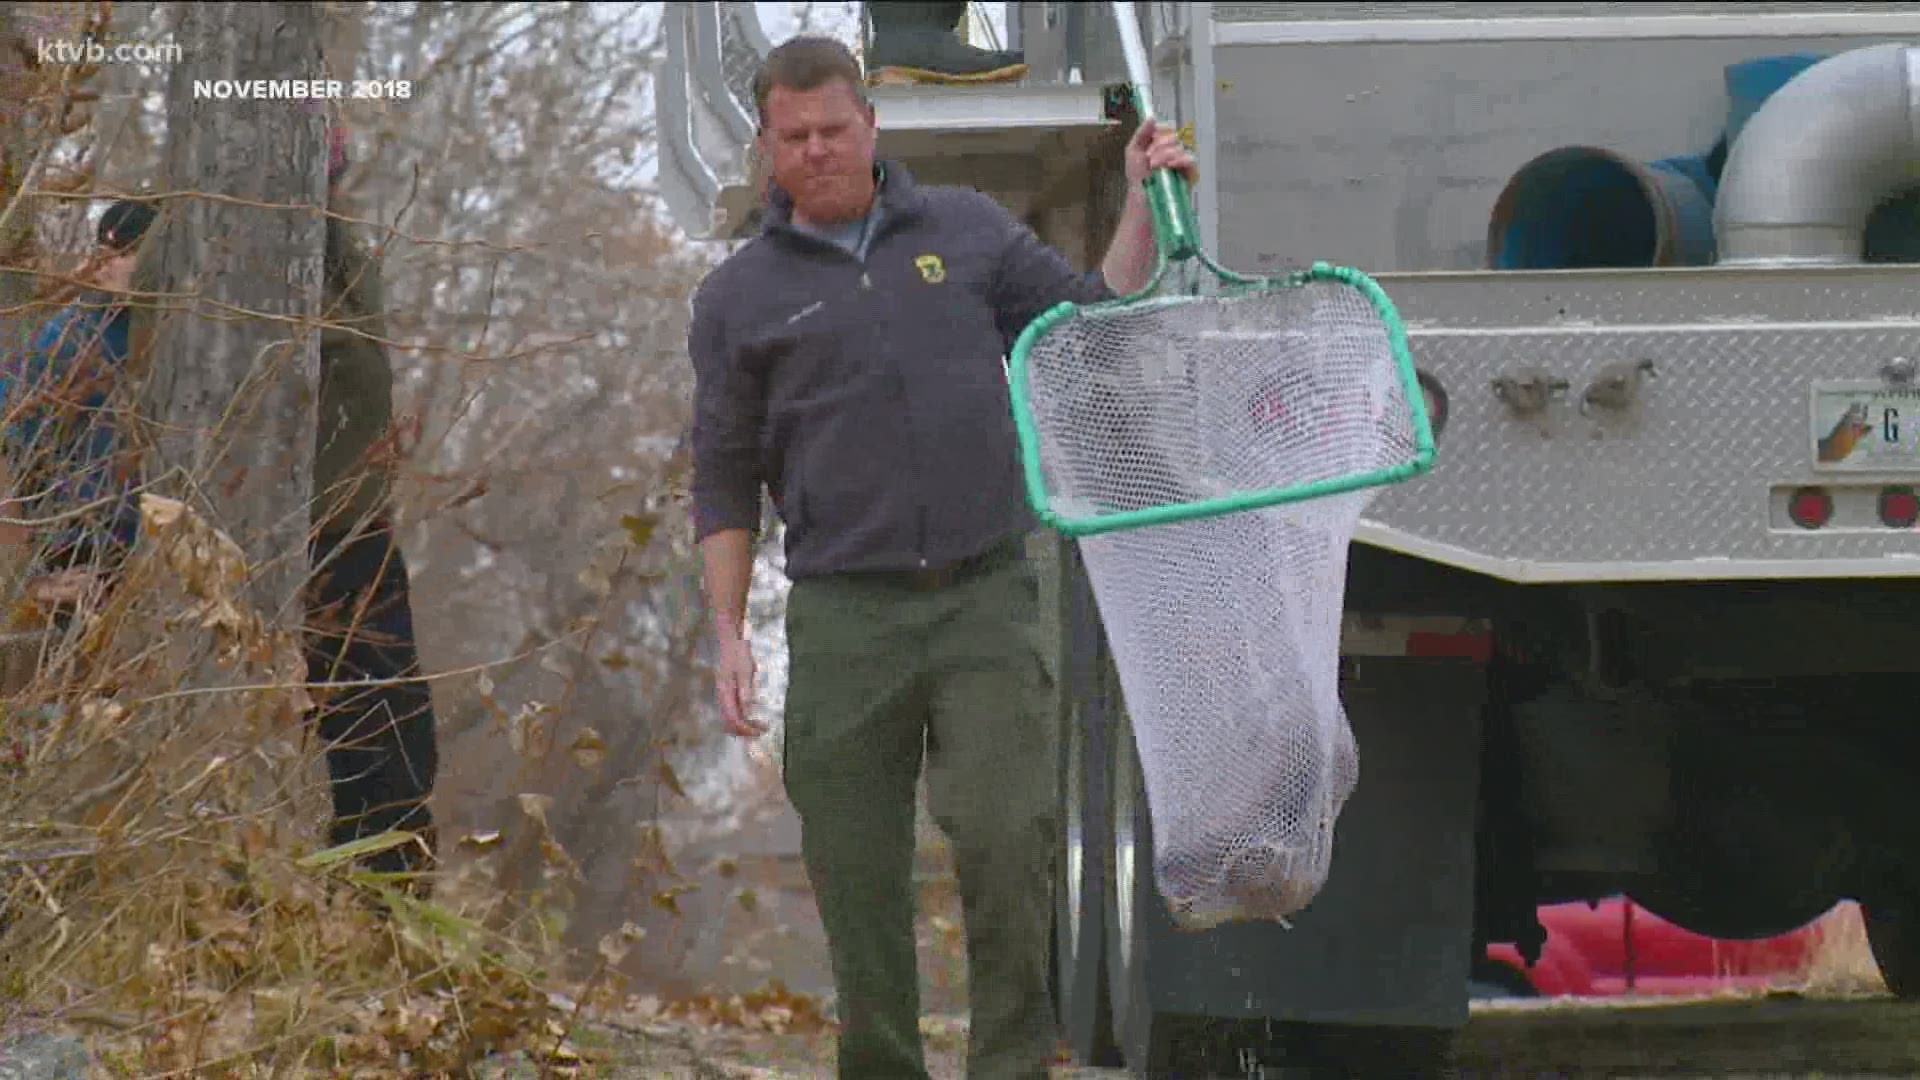 The fish will be released at five locations along the Boise River on Thursday, November 19.